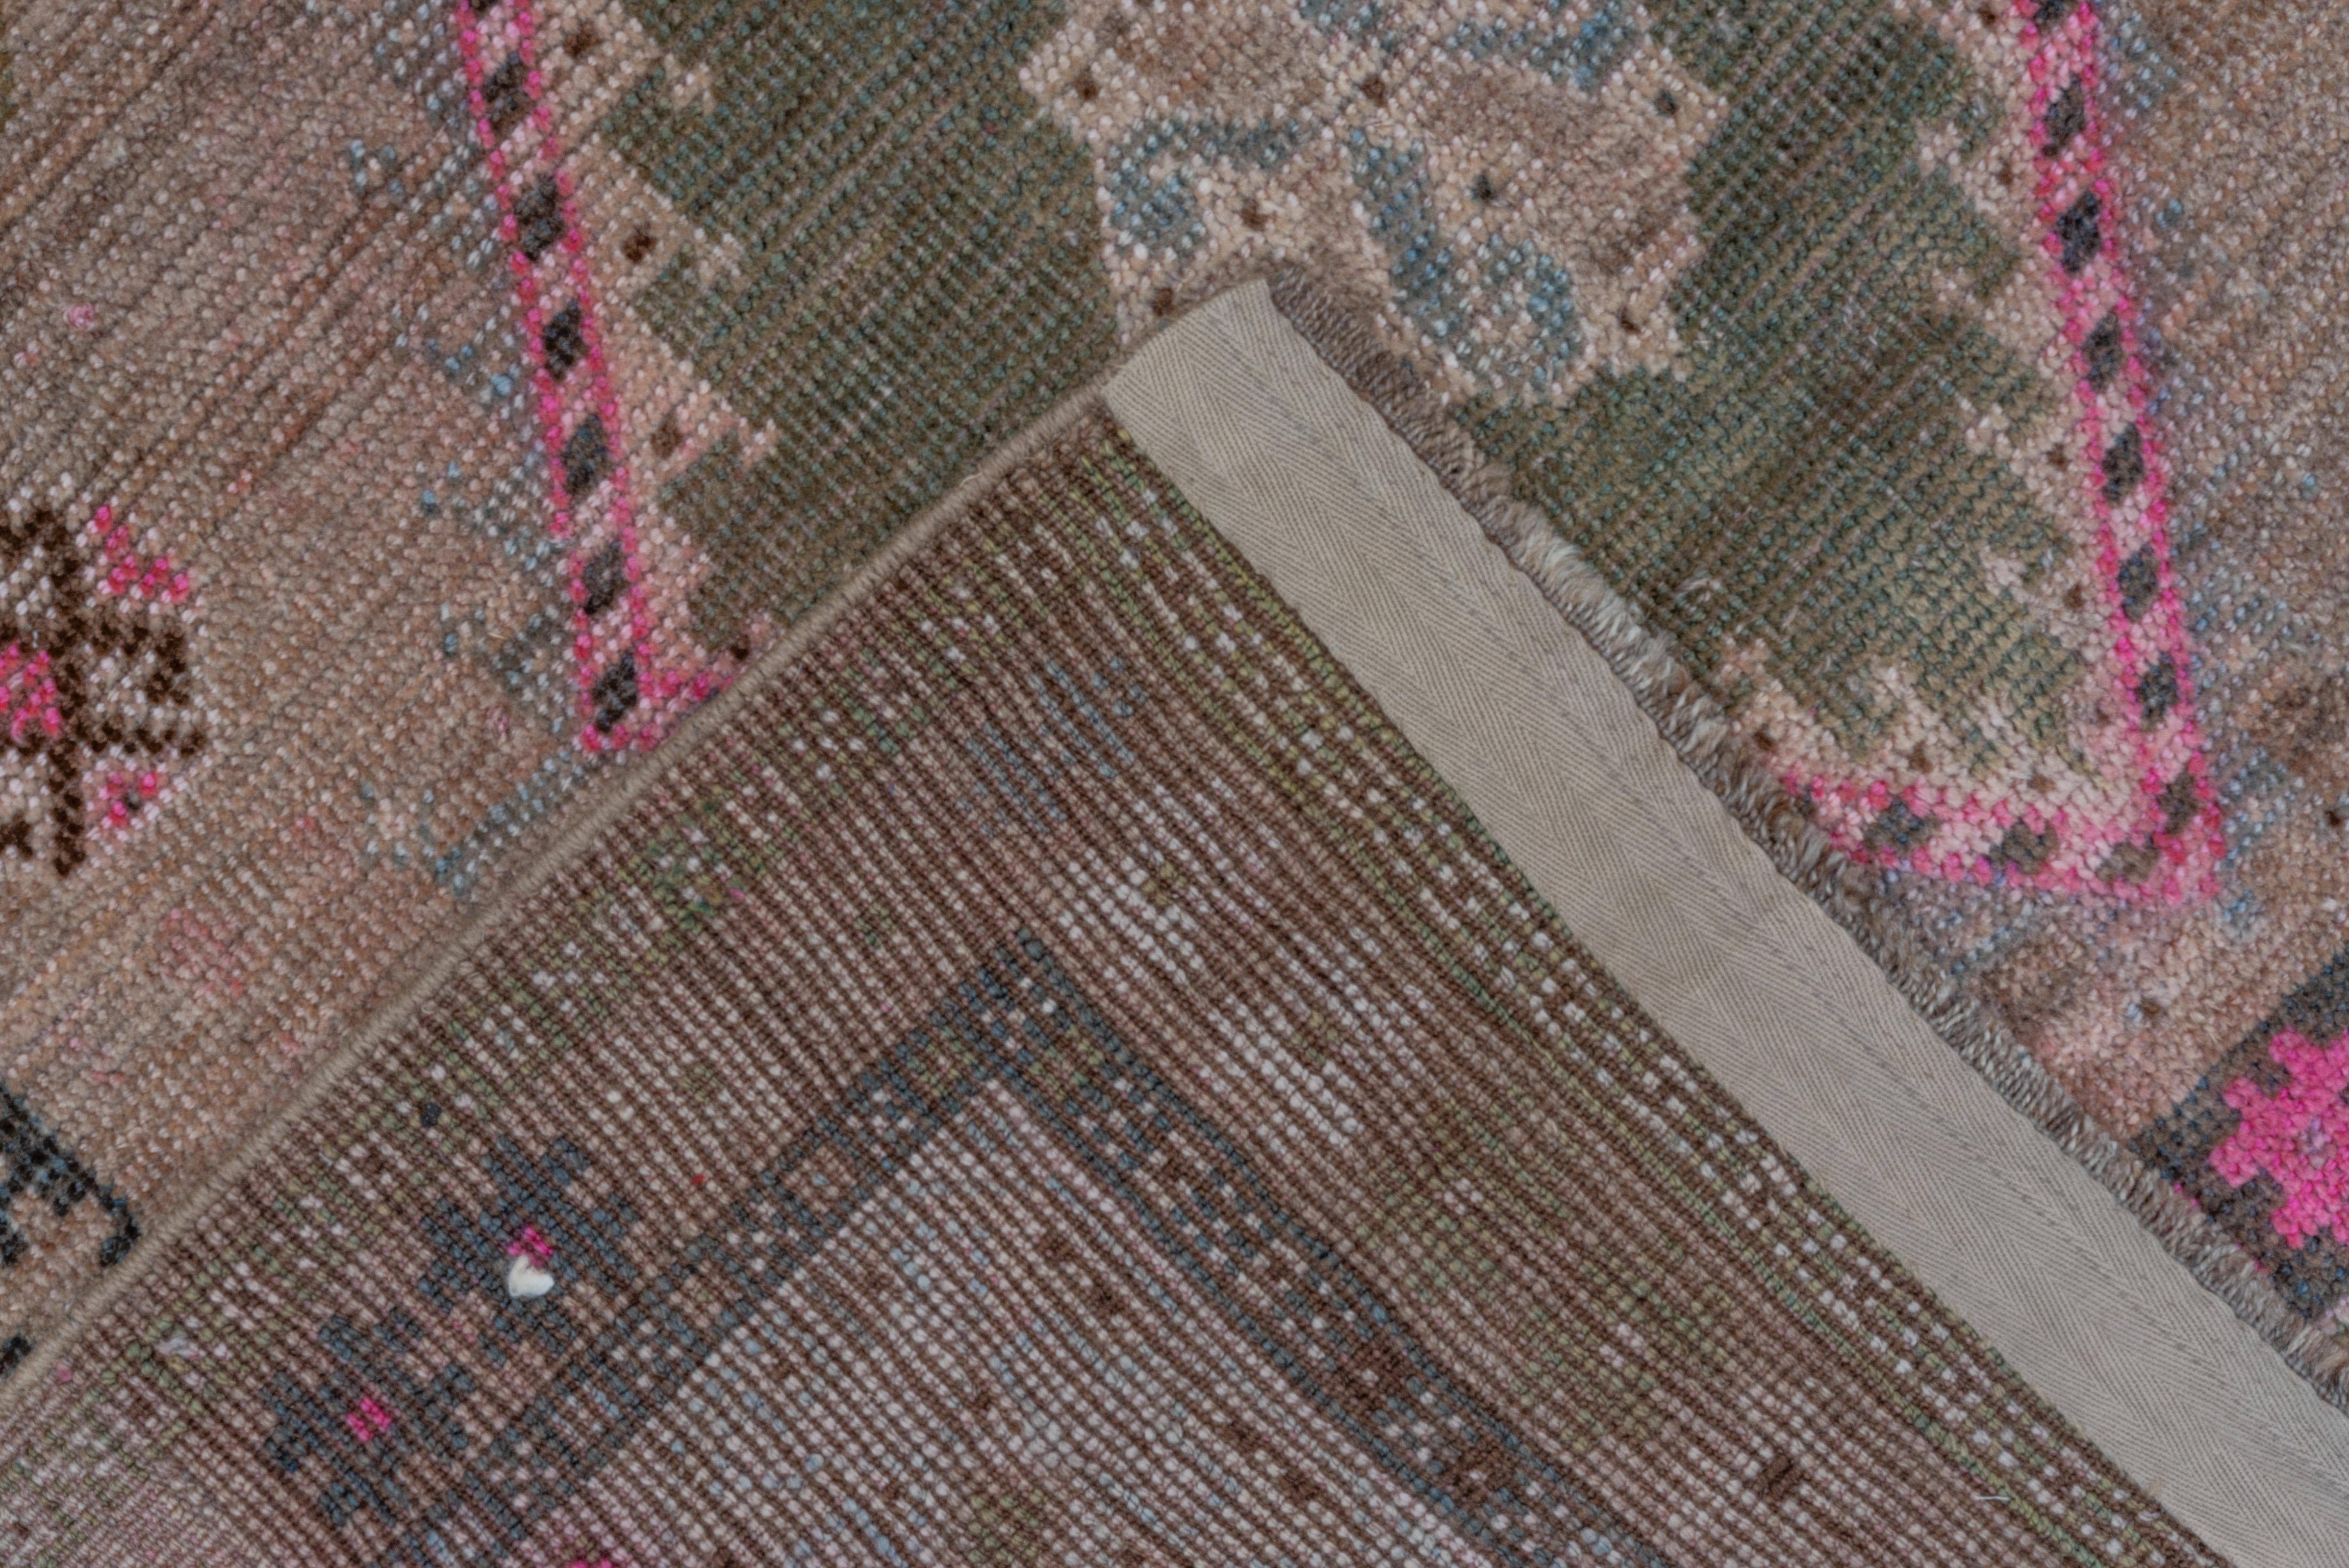 Tribal Antique Persian Gabbeh Rug, Light Brown Field, Pink & Green Accents, circa 1930s For Sale